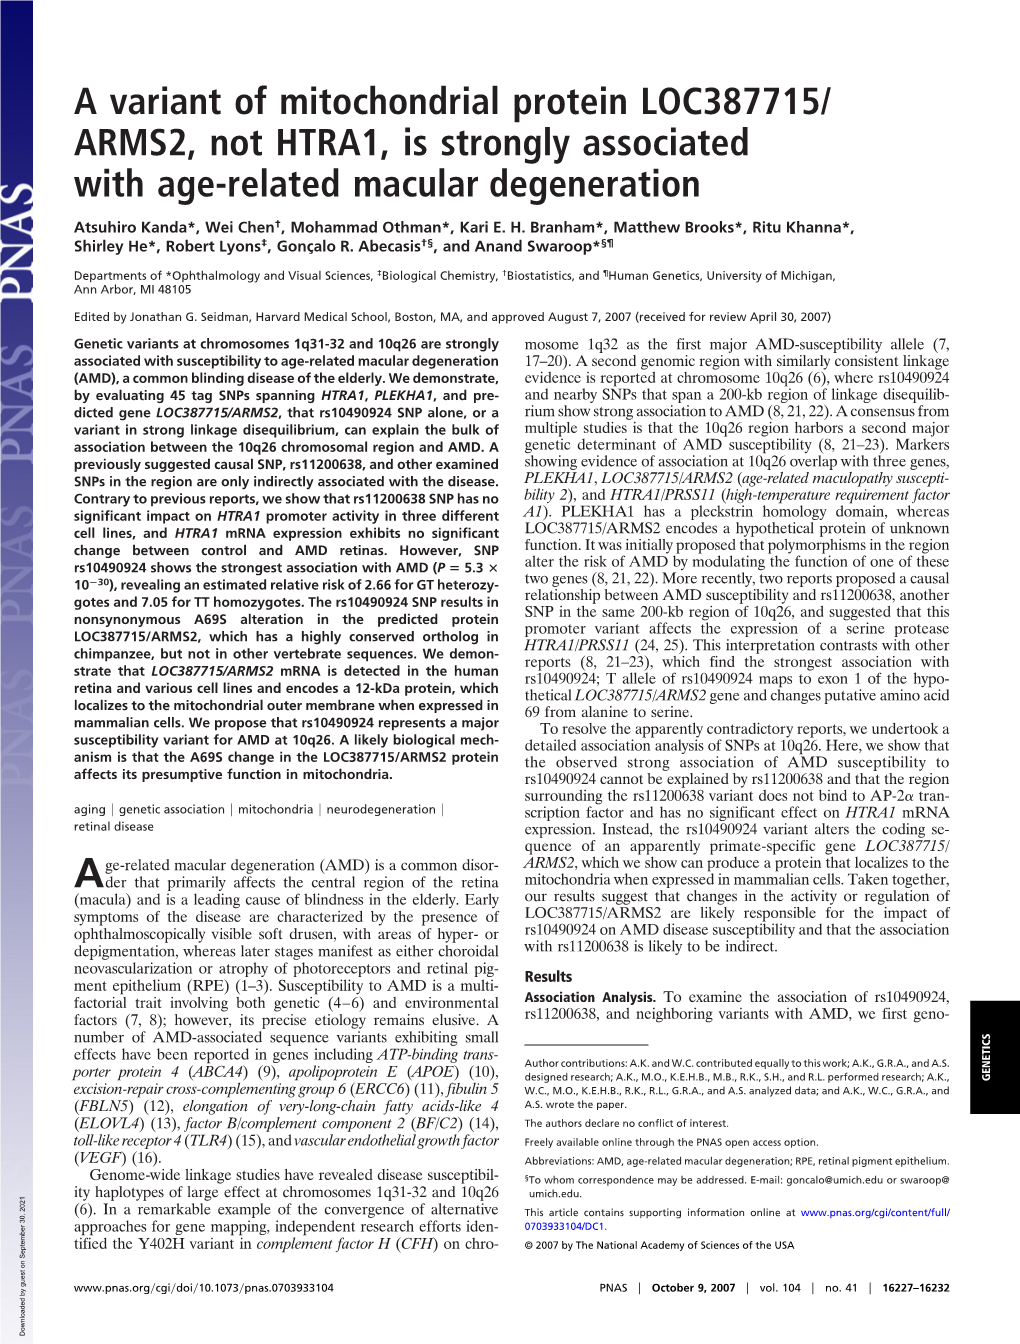 A Variant of Mitochondrial Protein LOC387715/ ARMS2, Not HTRA1, Is Strongly Associated with Age-Related Macular Degeneration